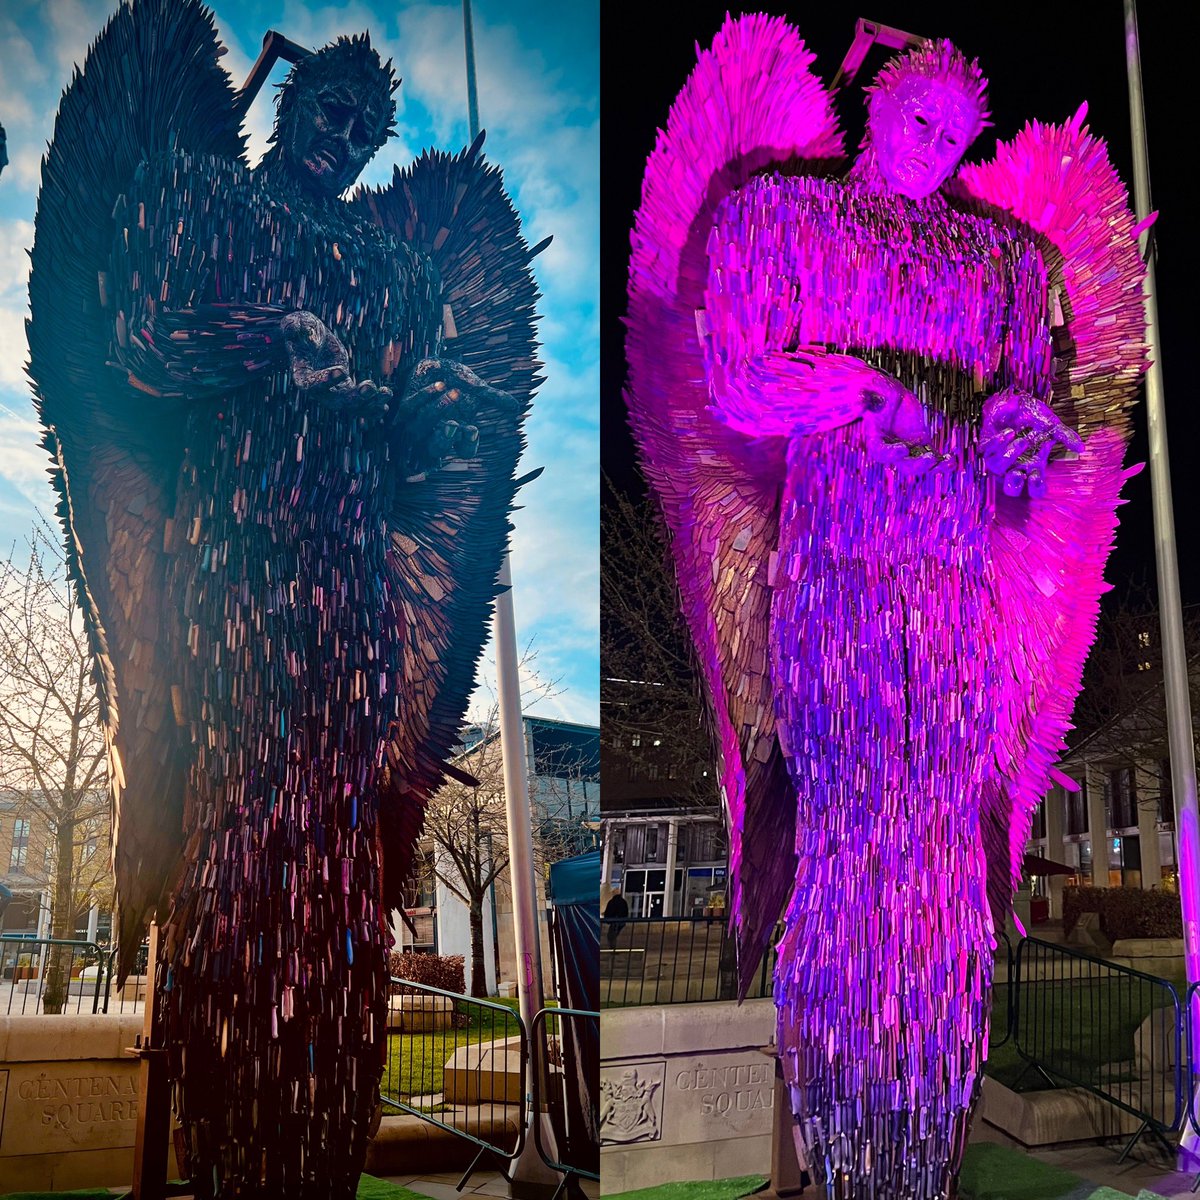 Visiting Bradford this evening gave me the perfect opportunity to visit the #KnifeAngel It is an impressively profound sculpture that should be see by all day or night @MayorOfWY @DeputyMayorPCWY @wy_vru @YouthBradford @bradfordmdc